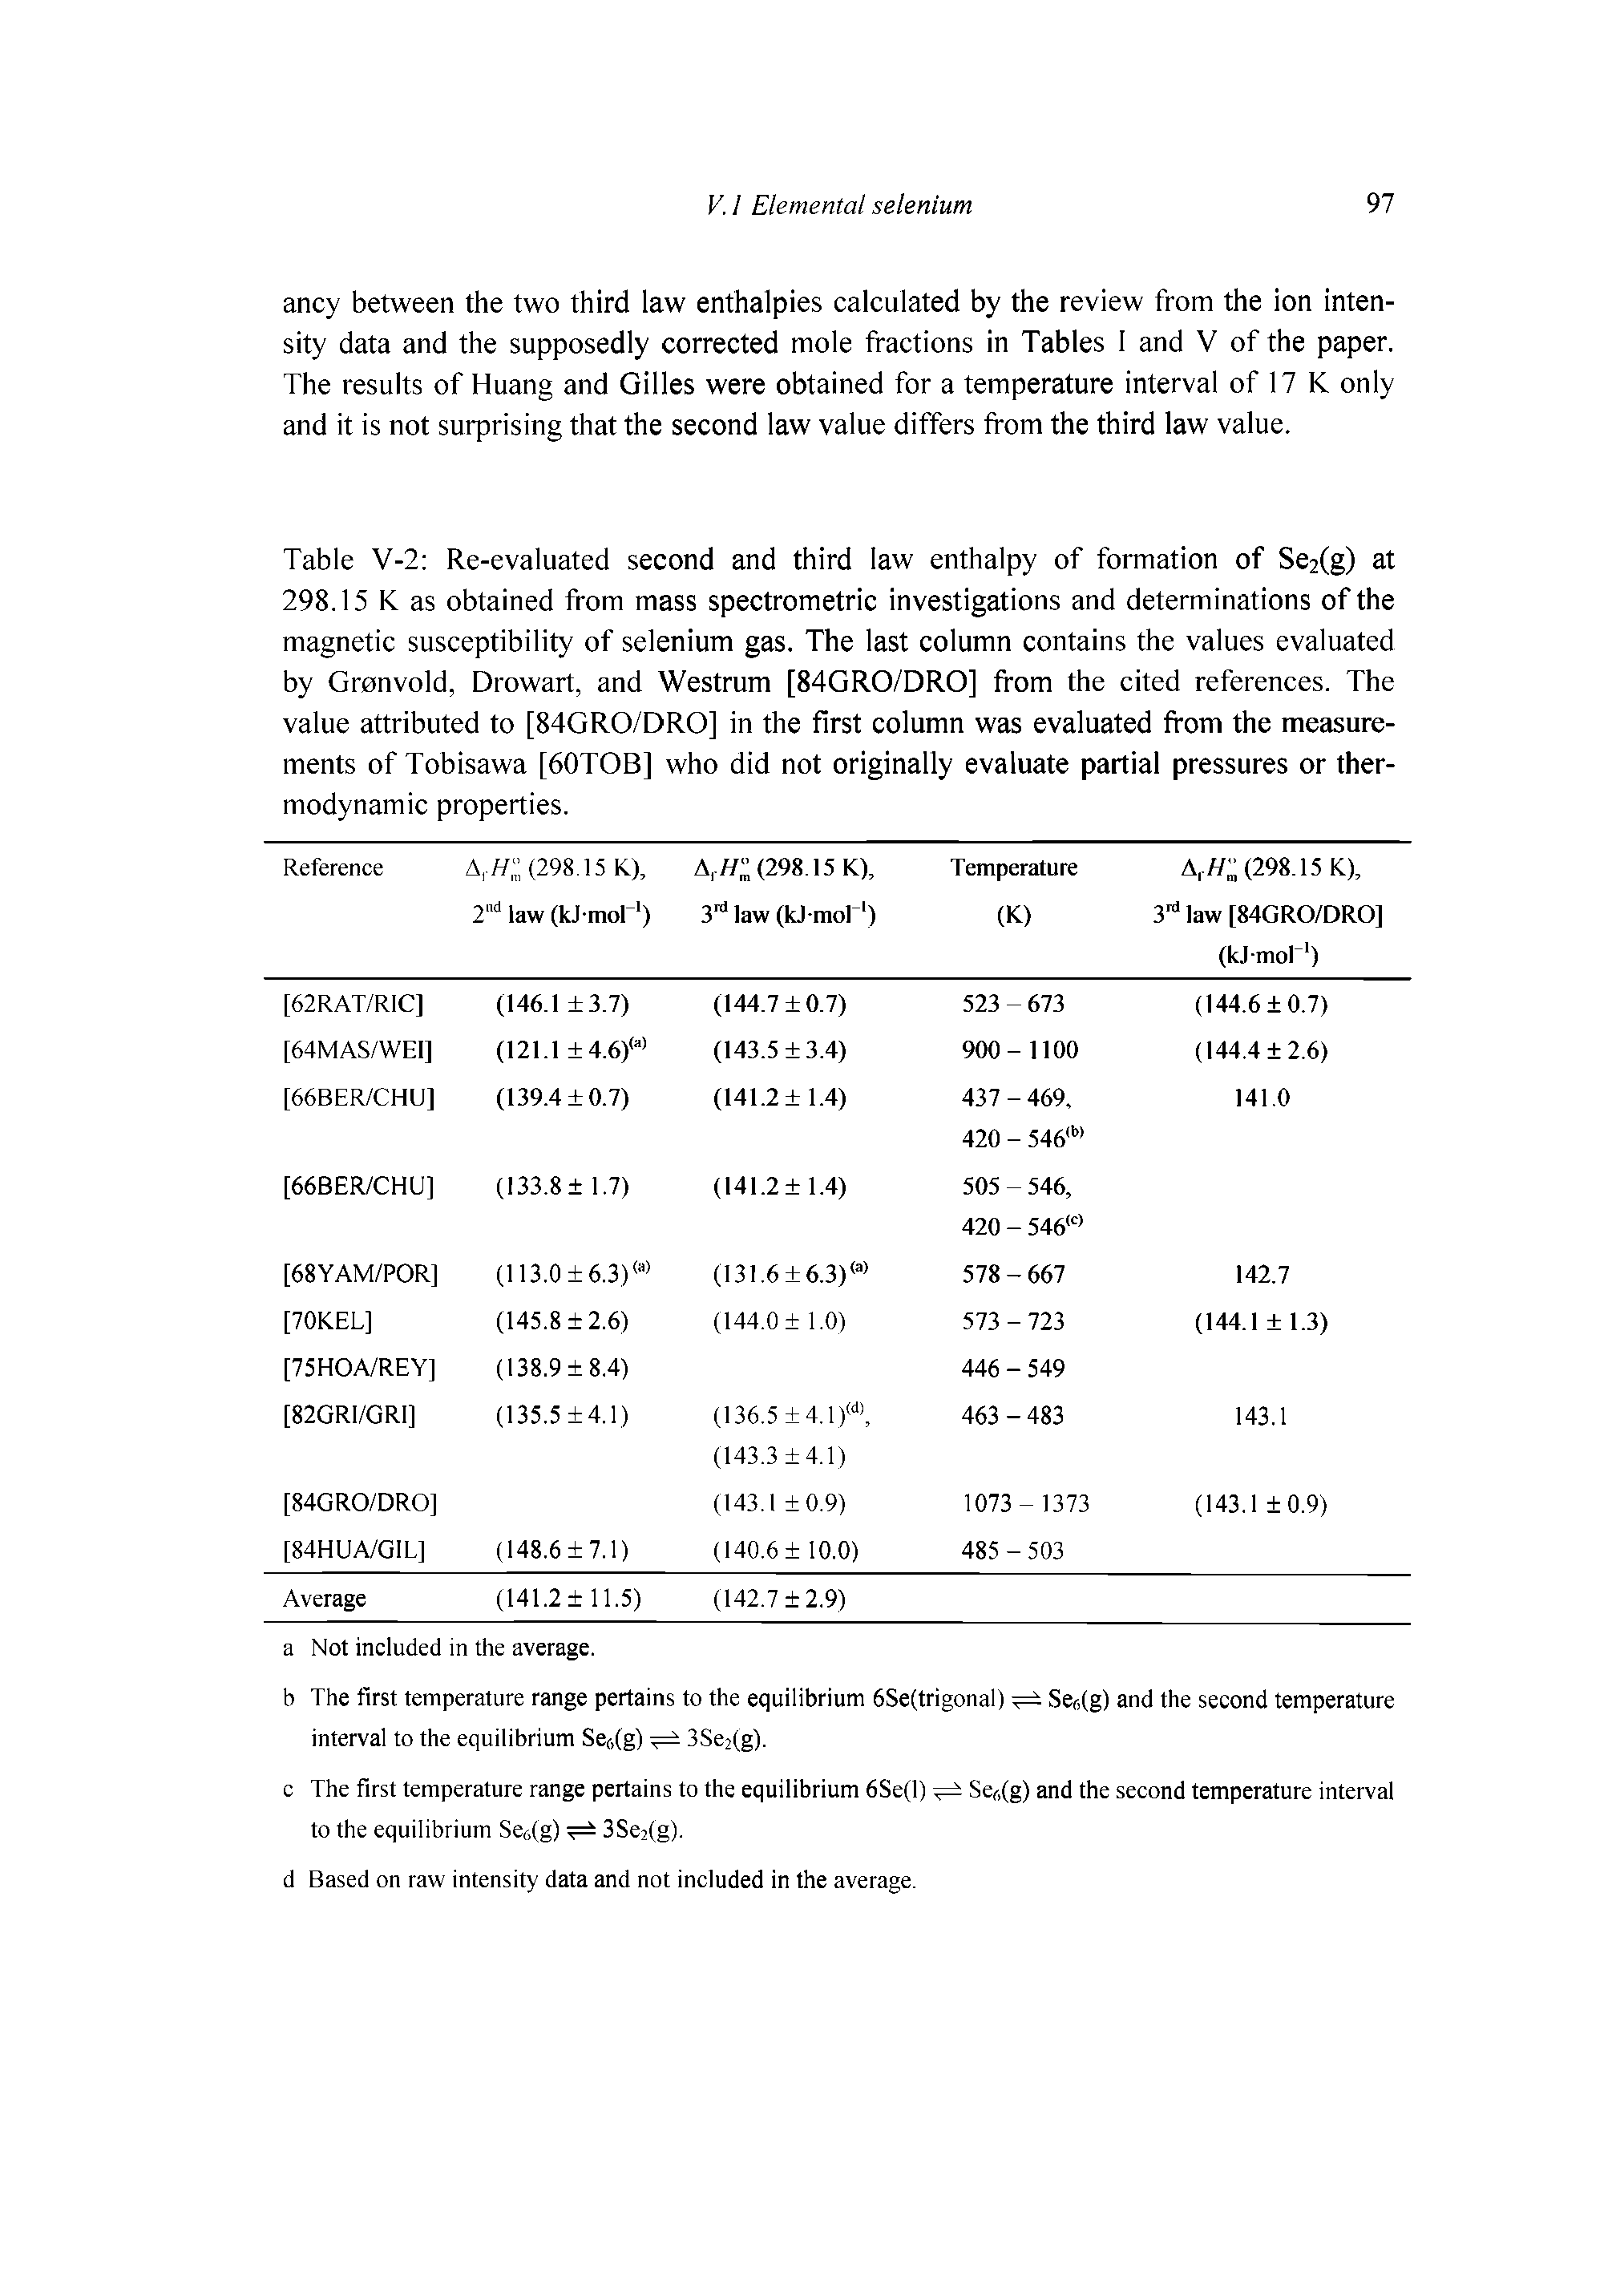 Table V-2 Re-evaluated second and third law enthalpy of formation of Se2(g) at 298.15 K as obtained from mass spectrometric investigations and determinations of the magnetic susceptibility of selenium gas. The last column contains the values evaluated by Gronvold, Drowart, and Westrum [84GRO/DRO] from the cited references. The value attributed to [84GRO/DRO] in the first column was evaluated from the measurements of Tobisawa [60TOB] who did not originally evaluate partial pressures or thermodynamic properties.